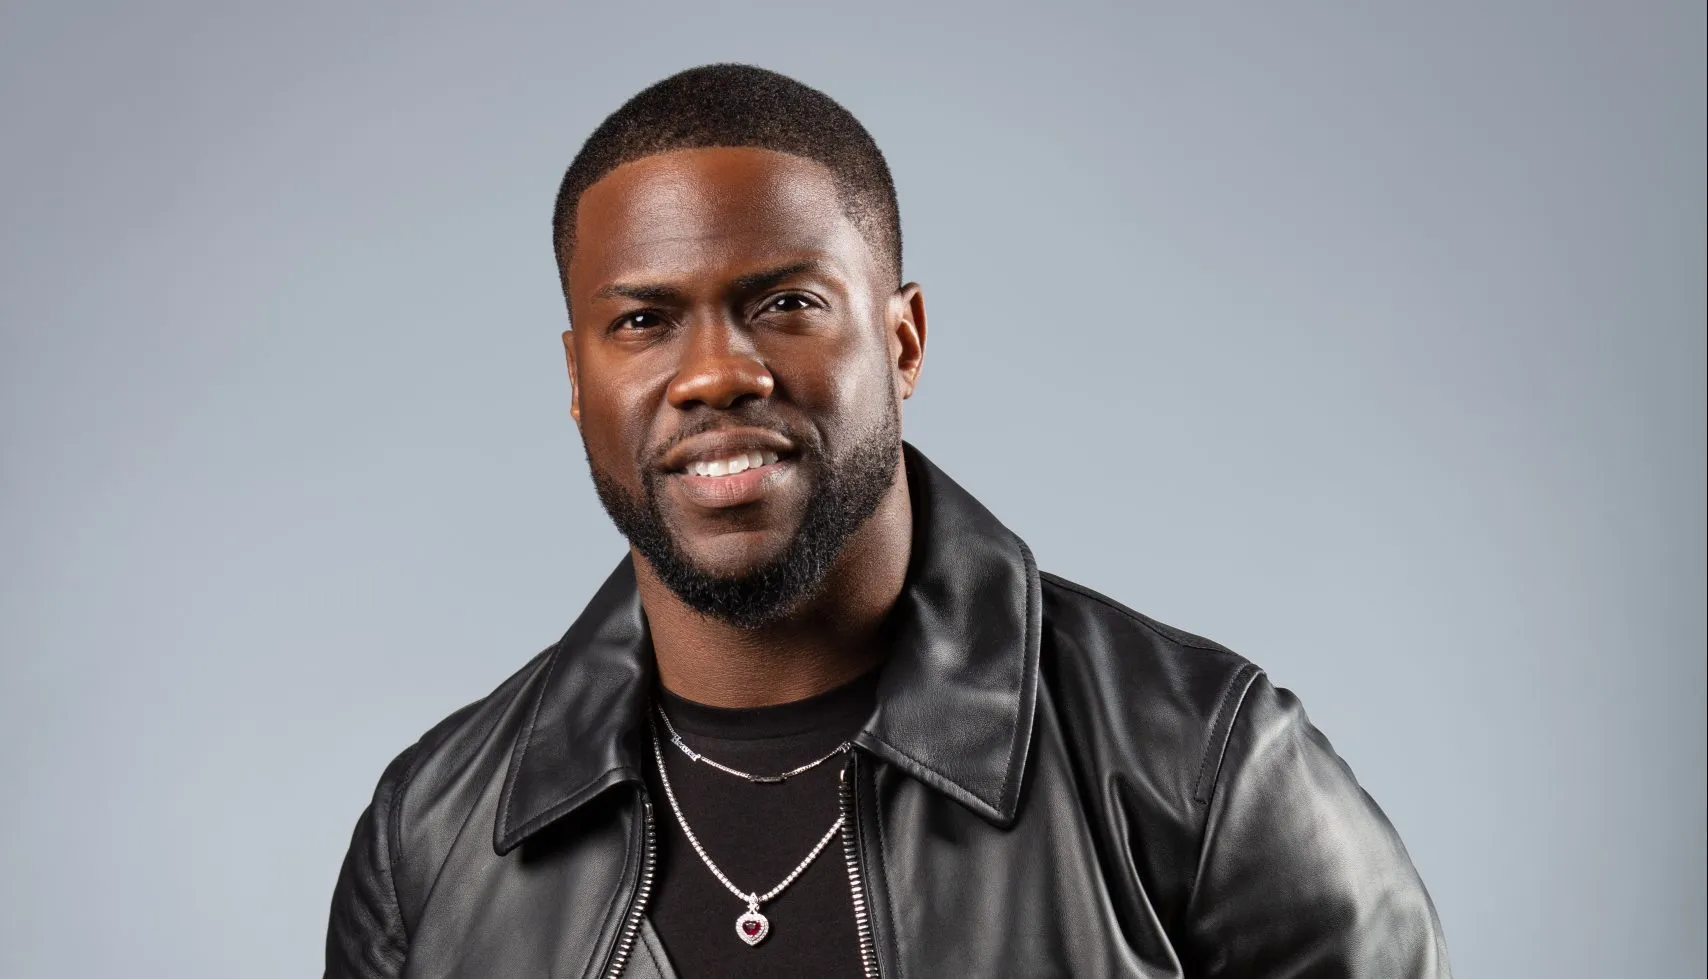 Kevin Hart family, wife, children, parents, siblings - Celebrity FAQs